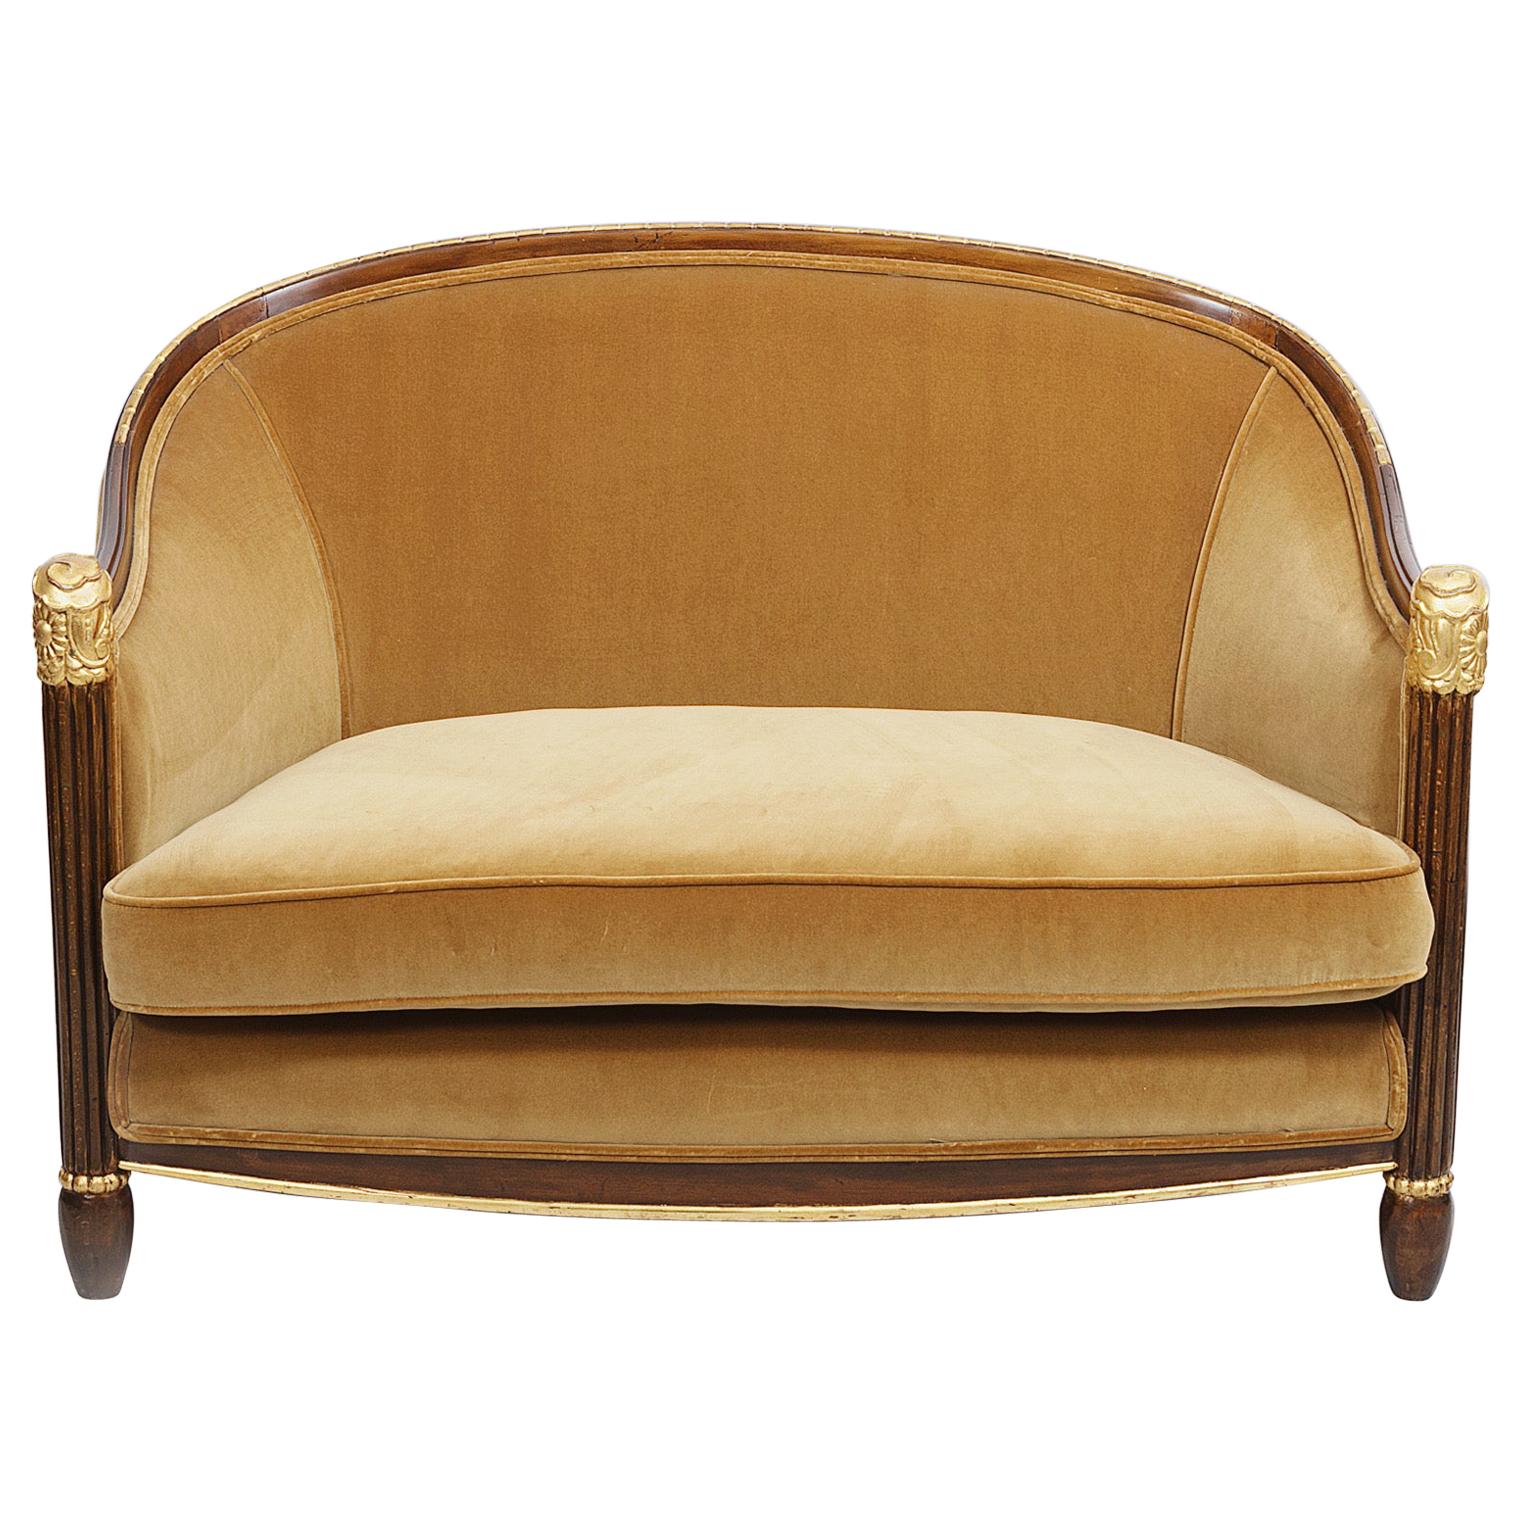 Extremely elegant French Art Deco carved salon settee covered in a rich gold velvet with front legs carved in gadroon style, finished at top in a hand carved floral pattern decorated in gold leaf. Top section of the bowed back is carved in a series